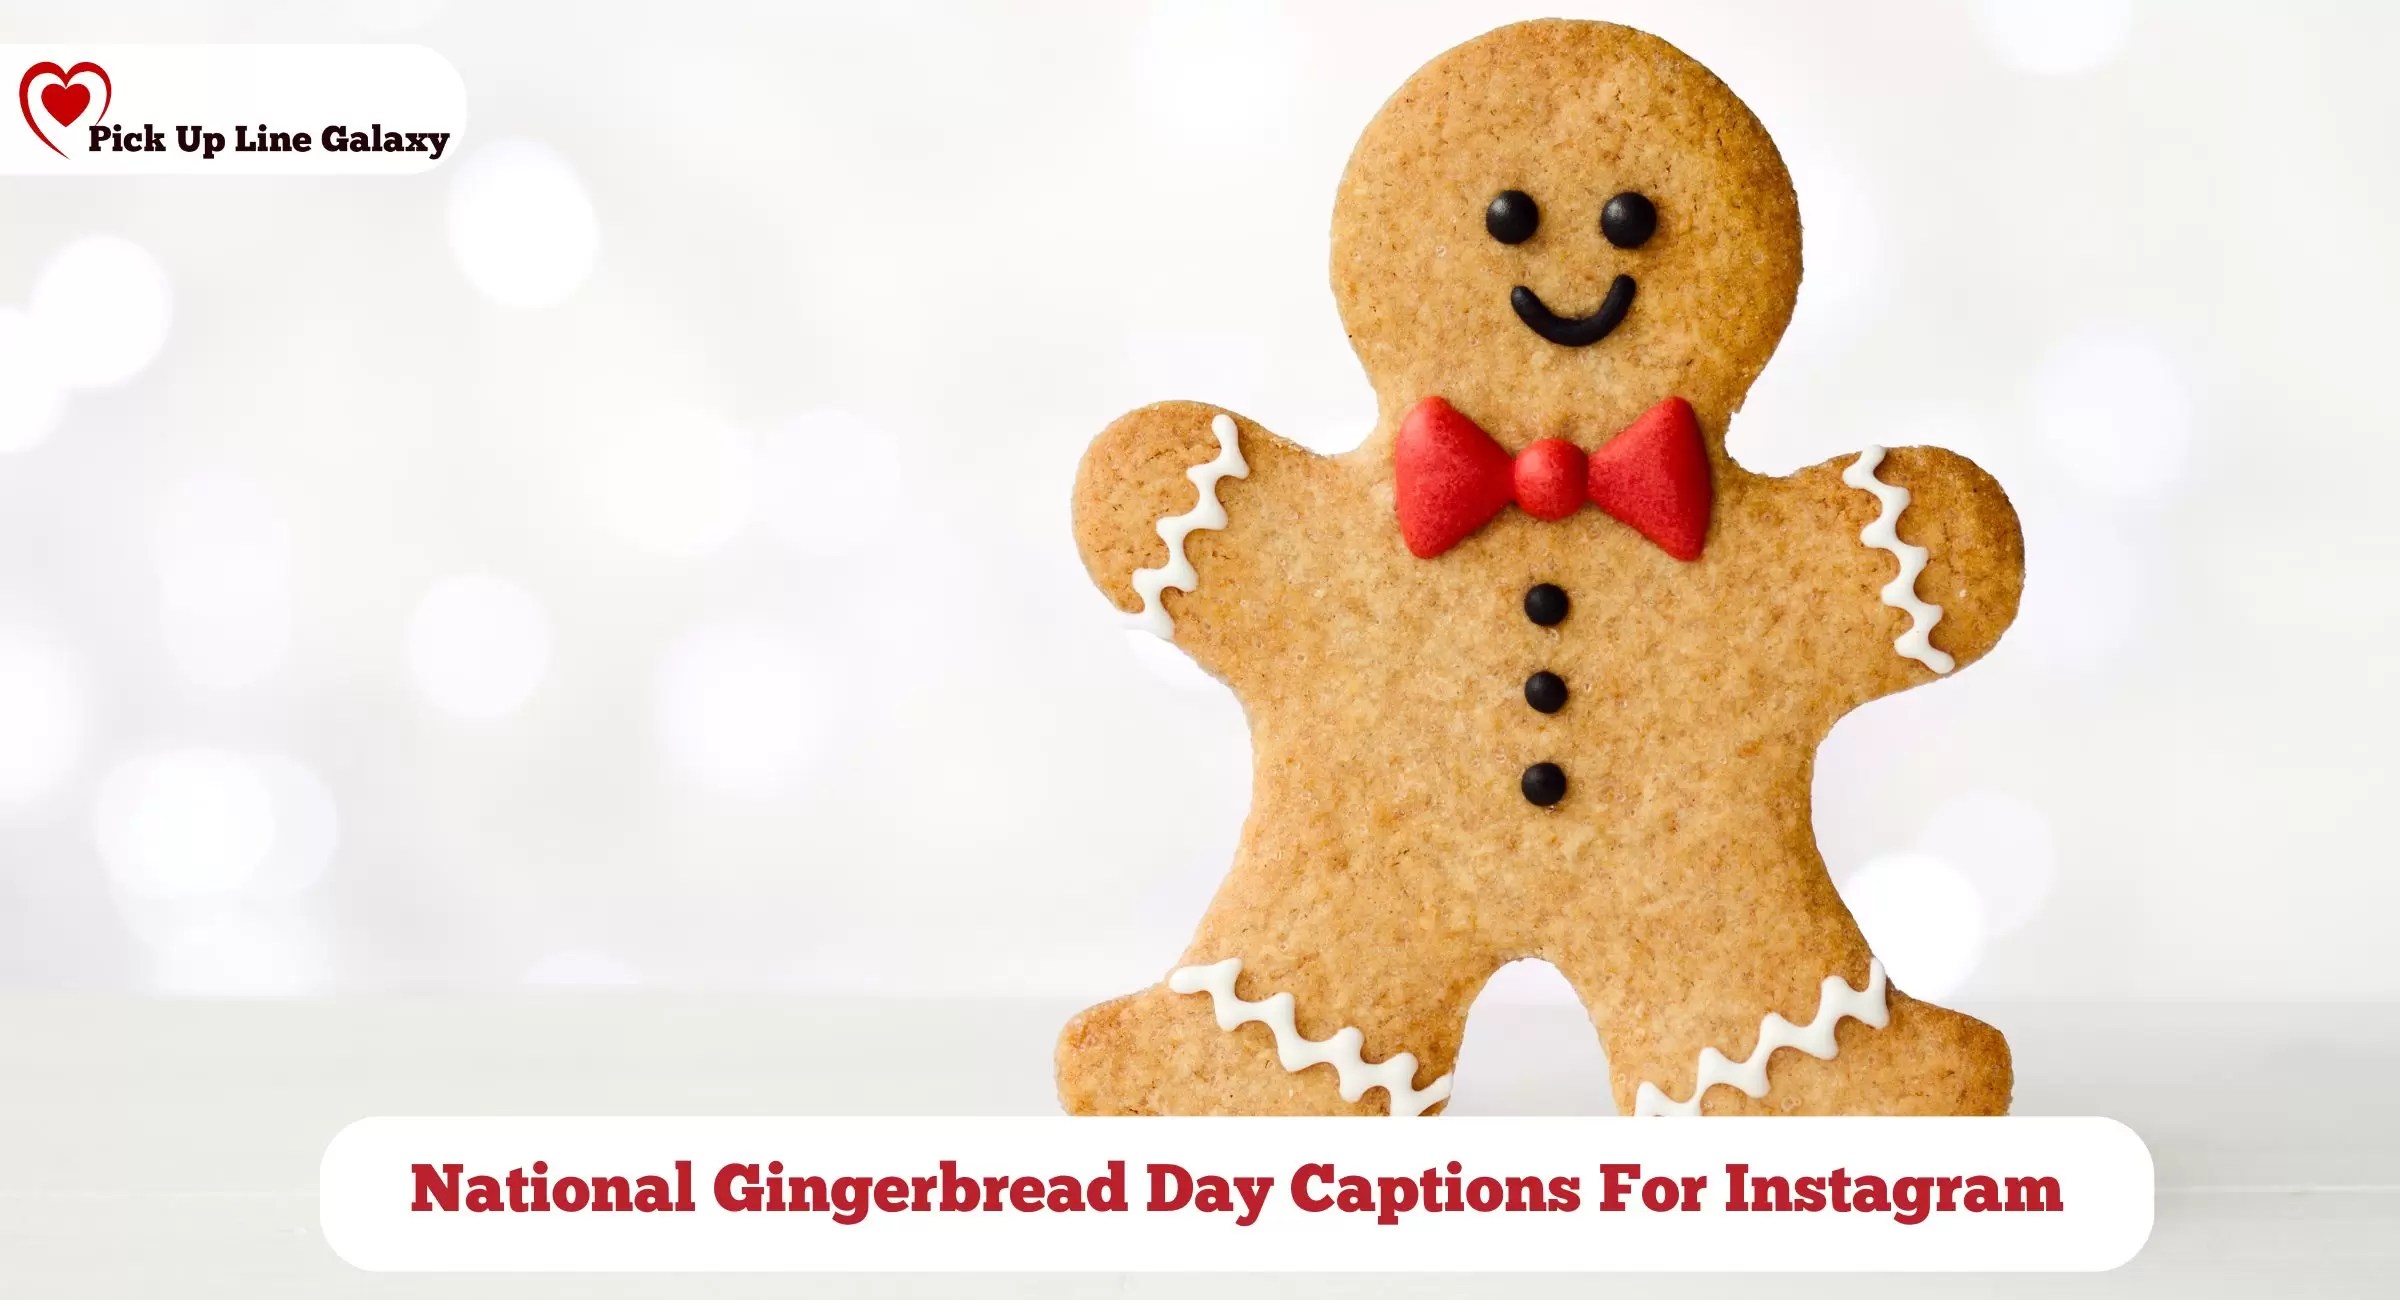 National Gingerbread Day Captions For Instagram